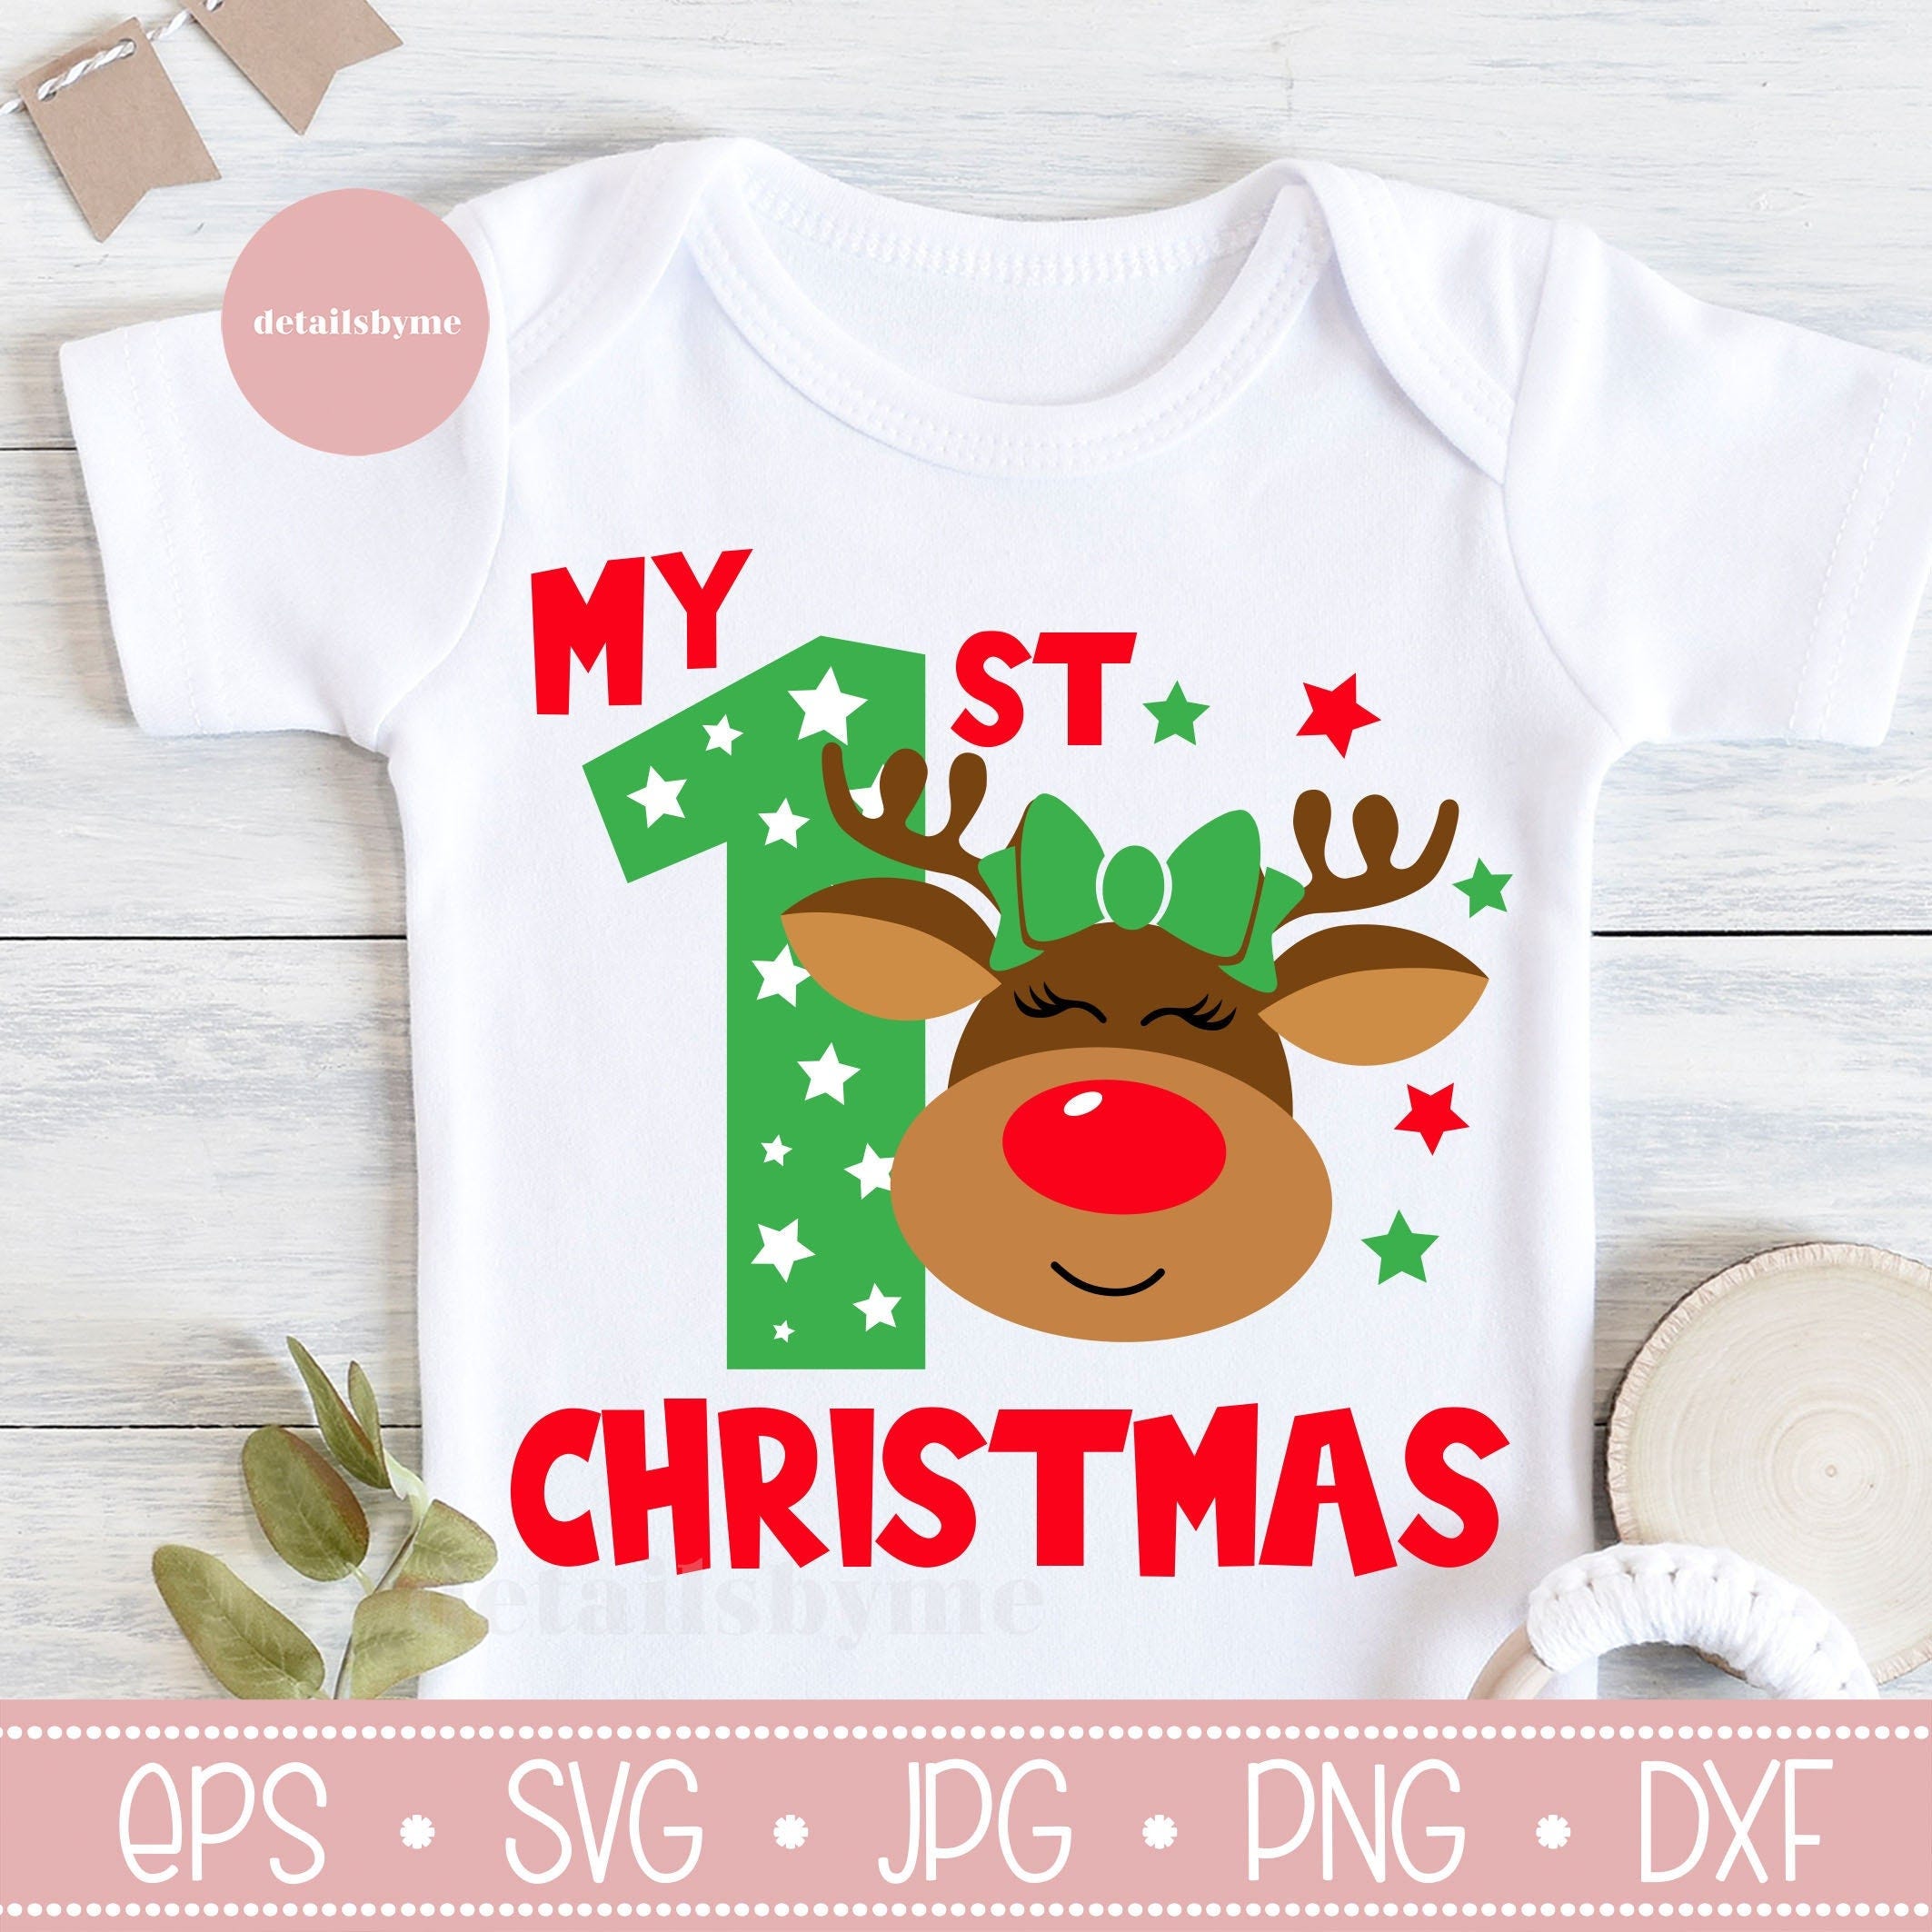 My First Christmas SVG, Baby First Christmas SVG, Baby First Xmas SVG, My 1st Christmas Svg, Christmas Baby Svg, Newborn 1st Christmas